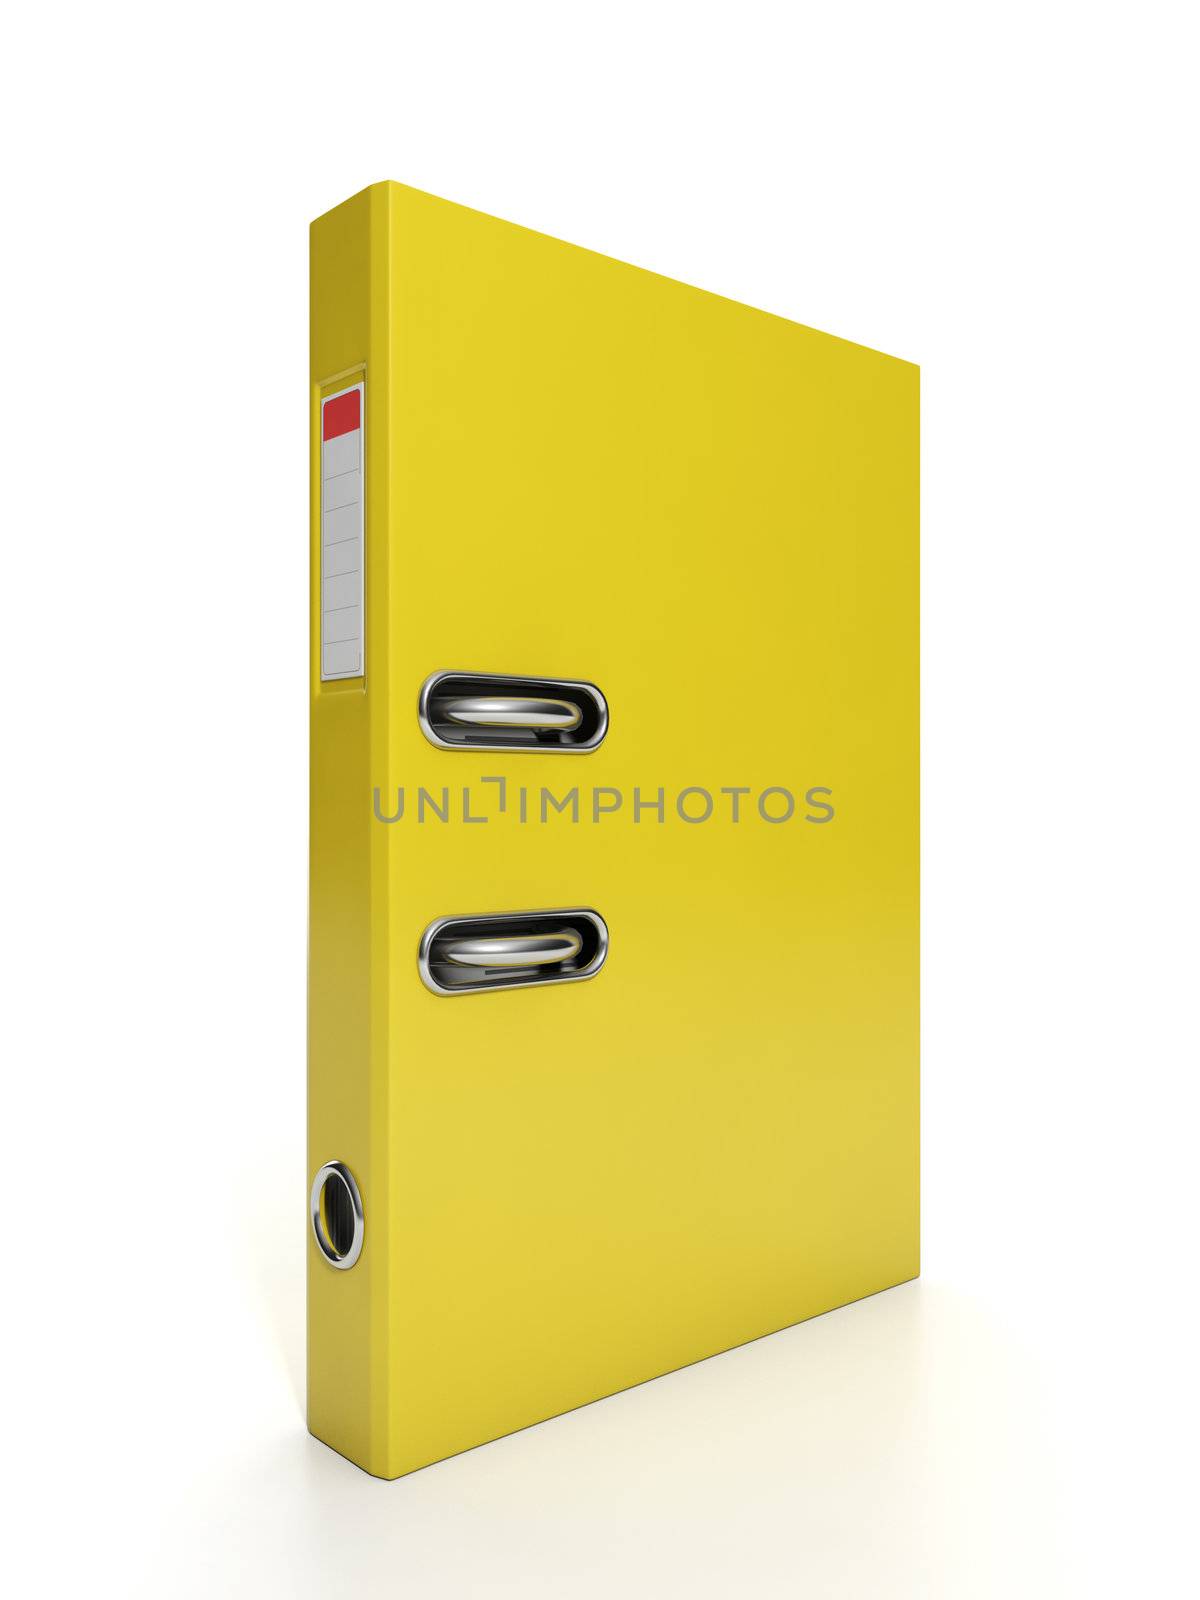 3d Illustration: Business objects. Yellow folder to a close-up by kolobsek